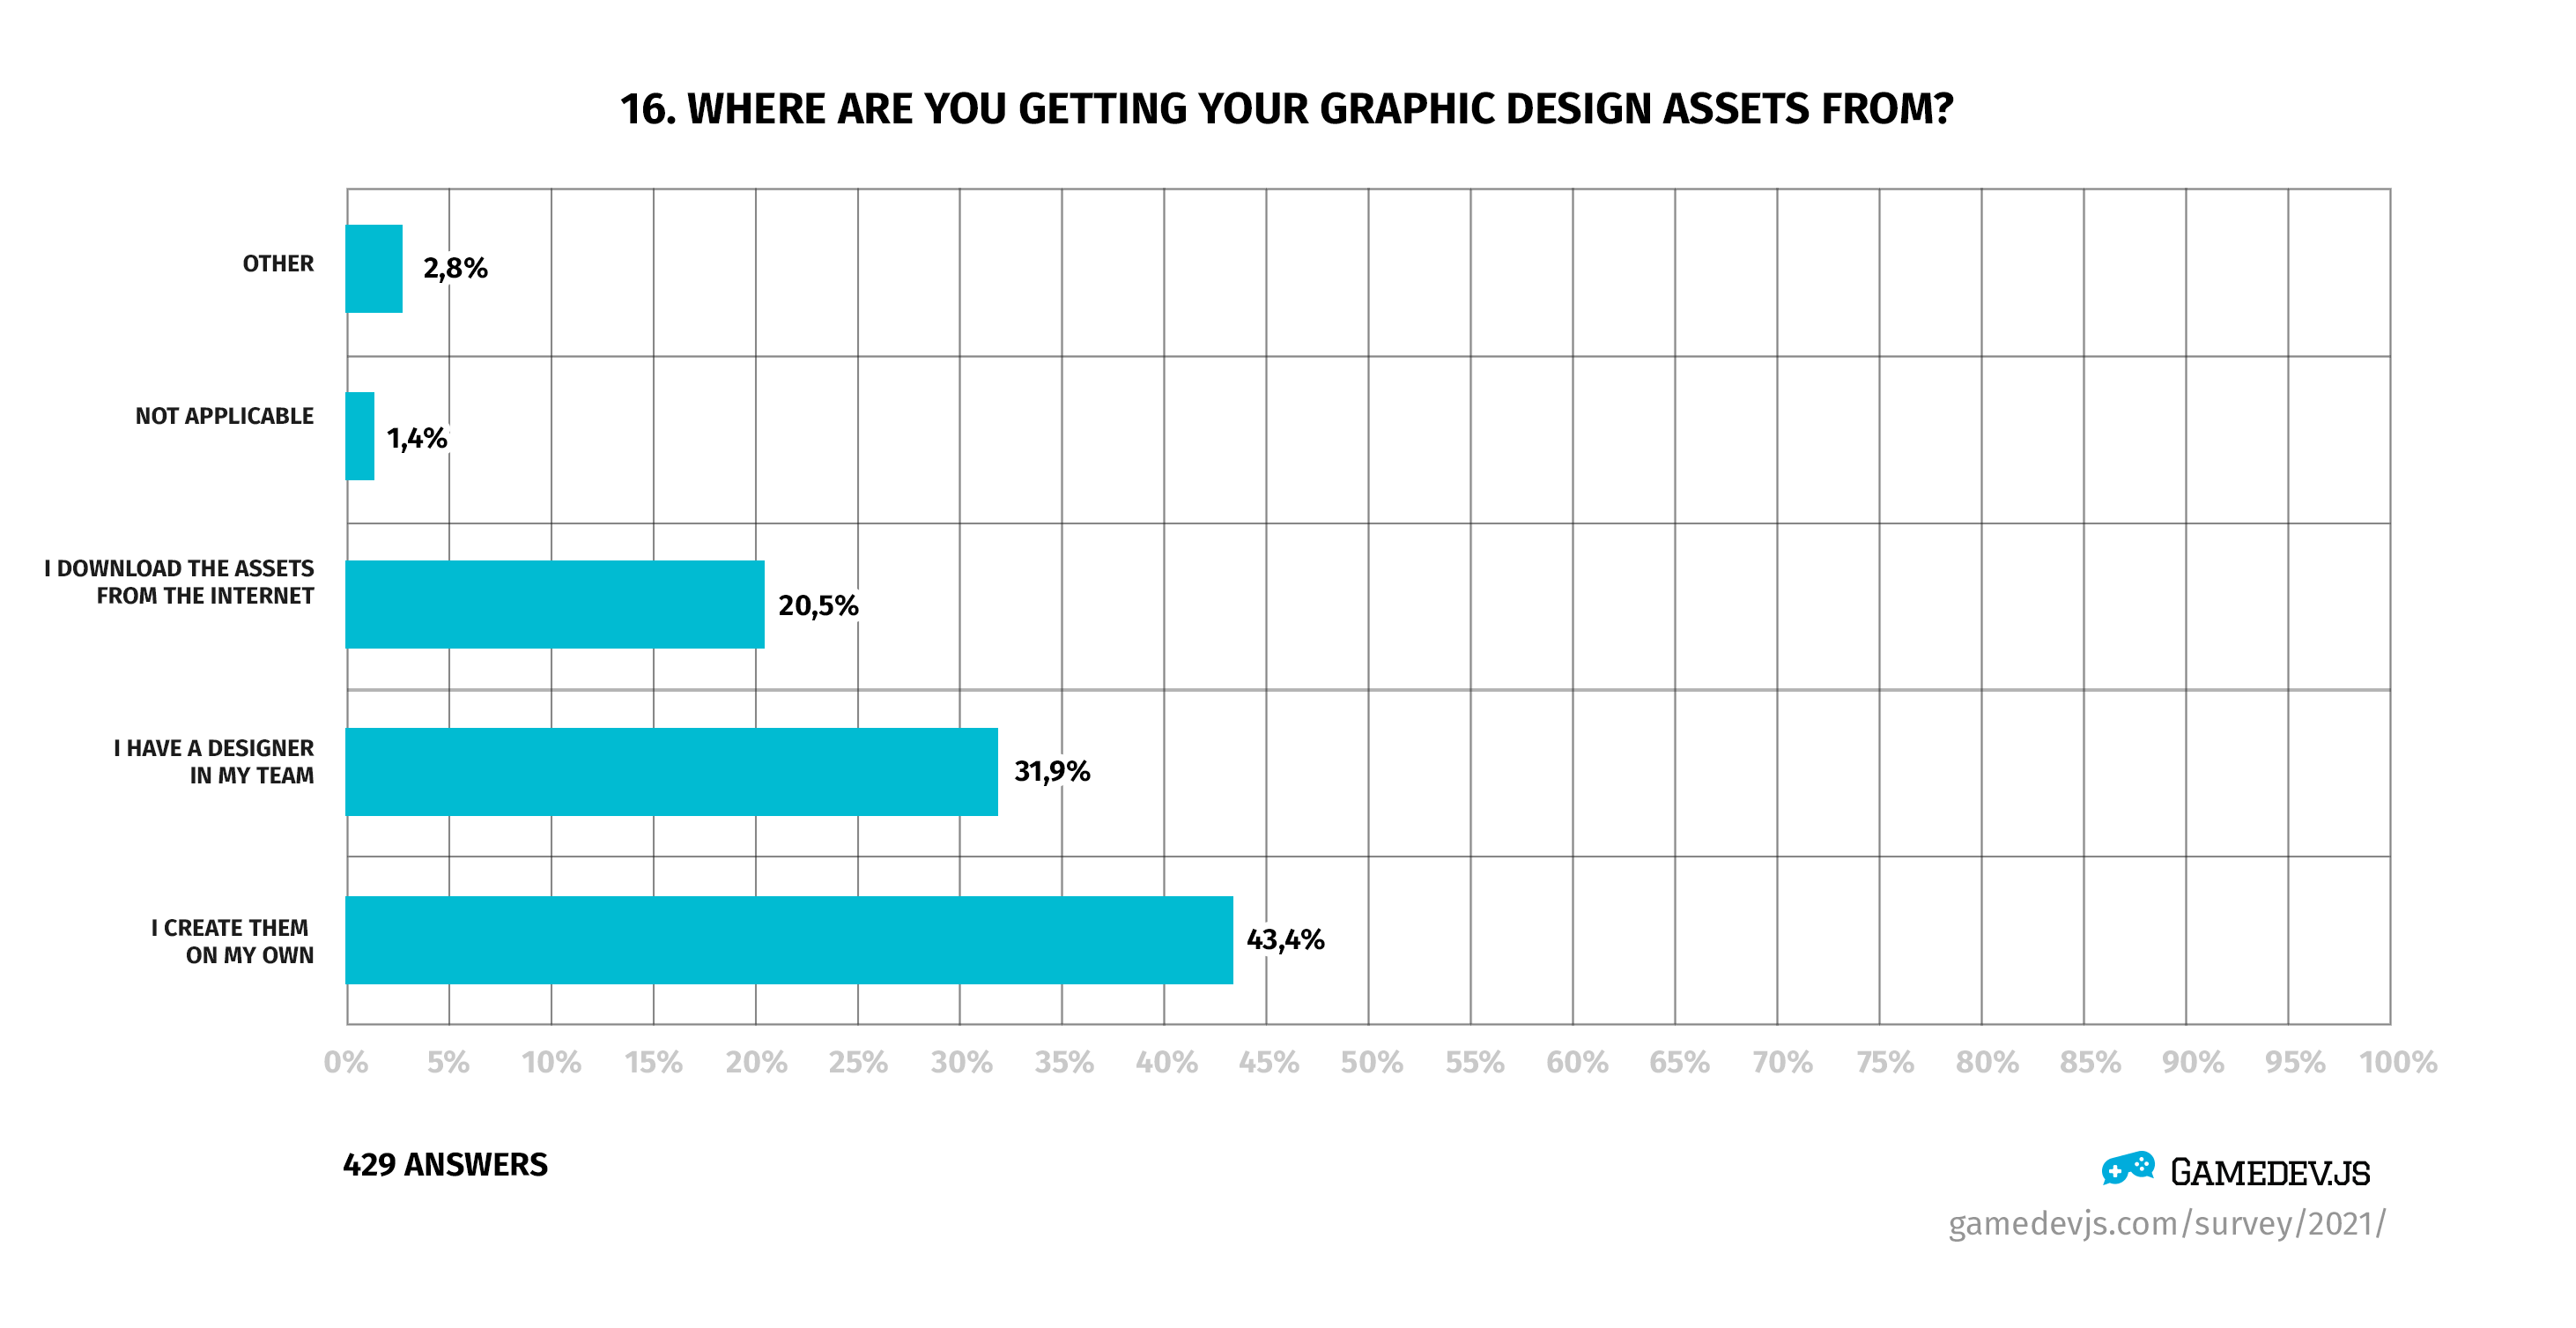 Gamedev.js Survey 2021 - Question #16: Where are you getting your graphic design assets from?